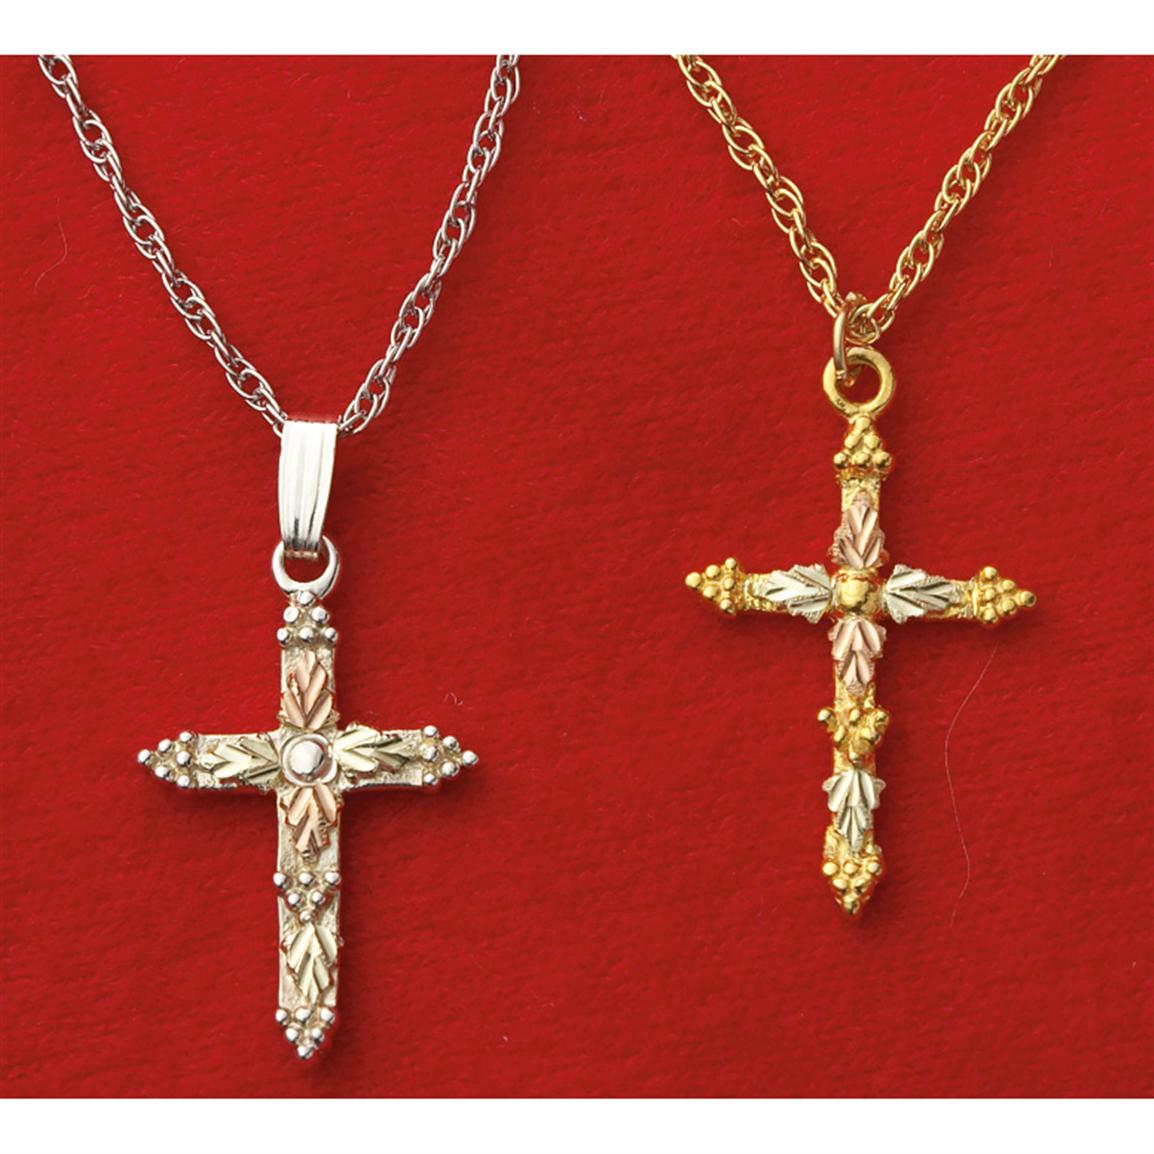 Mt. Rushmore® Black Hills Gold® Cross Necklace, Silver - 168283